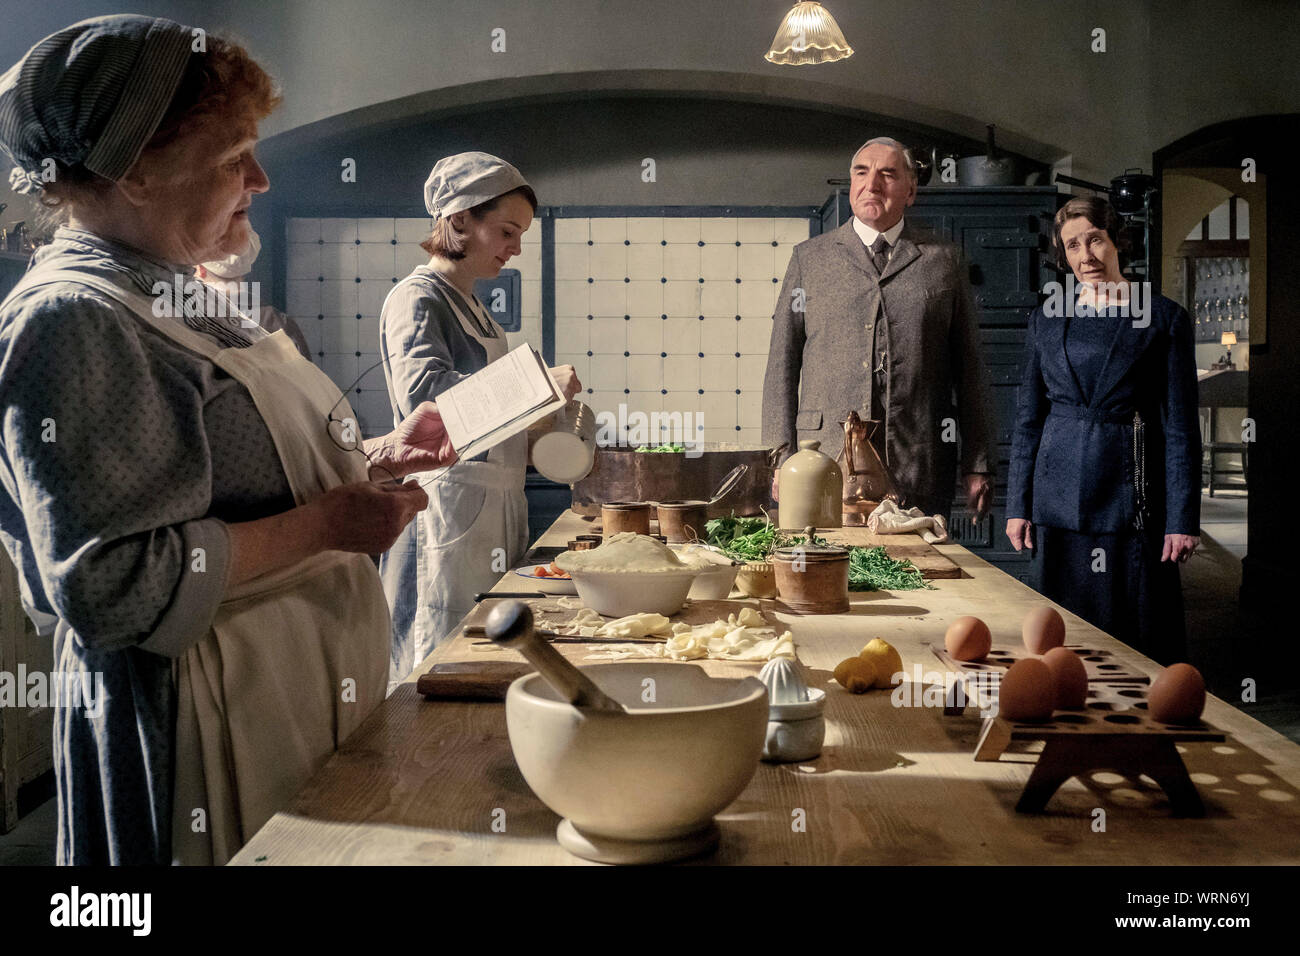 RELEASE DATE: September 20, 2019 TITLE: Downton Abbey STUDIO: Focus Features DIRECTOR: Michael Engler PLOT: Adapted from the hit TV series Downton Abbey that tells the story of the Crawley family, a wealthy owner of a large estate in the English countryside in the early 20th century. STARRING: (L to R) Lesley Nicol stars as Mrs. Patmore, Sophie McShera as Daisy, Jim Carter as Mr. Carson and Phyllis Logas as Mrs. Hughes. (Credit Image: © Focus Features/Entertainment Pictures) Stock Photo